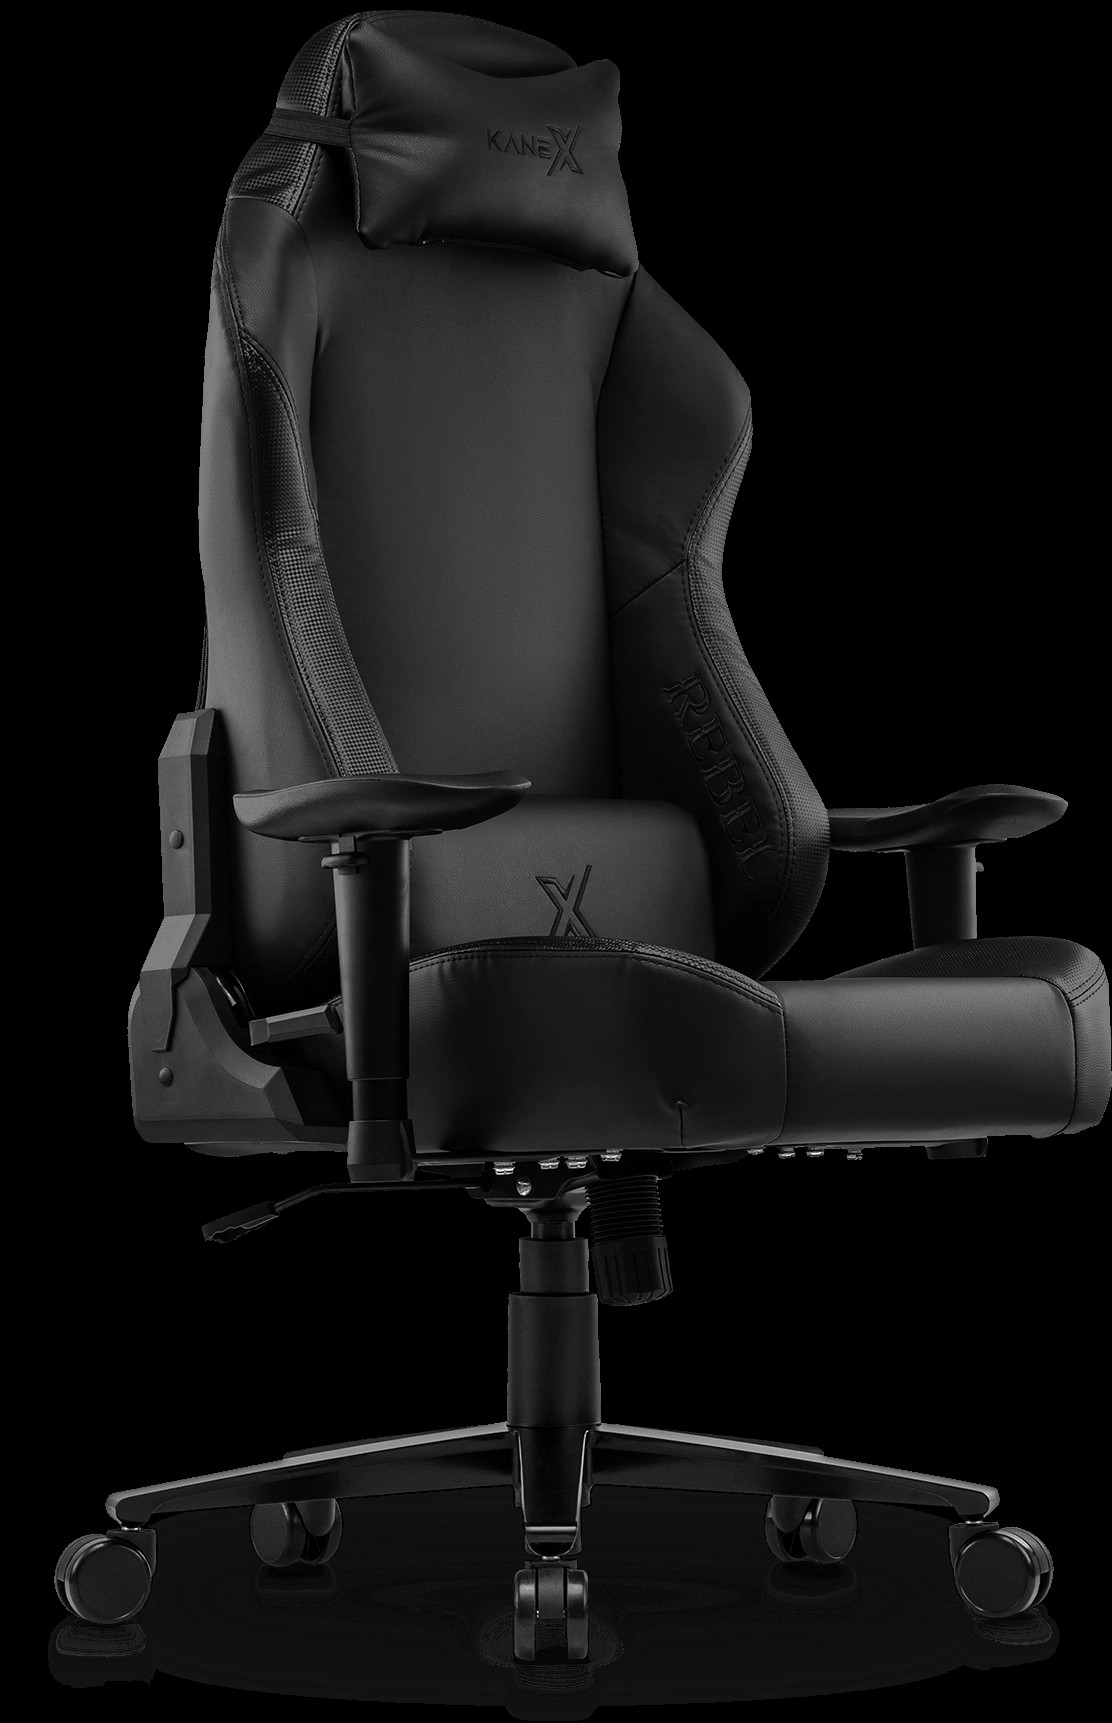 Rebel performance gaming chair in premium pu leather